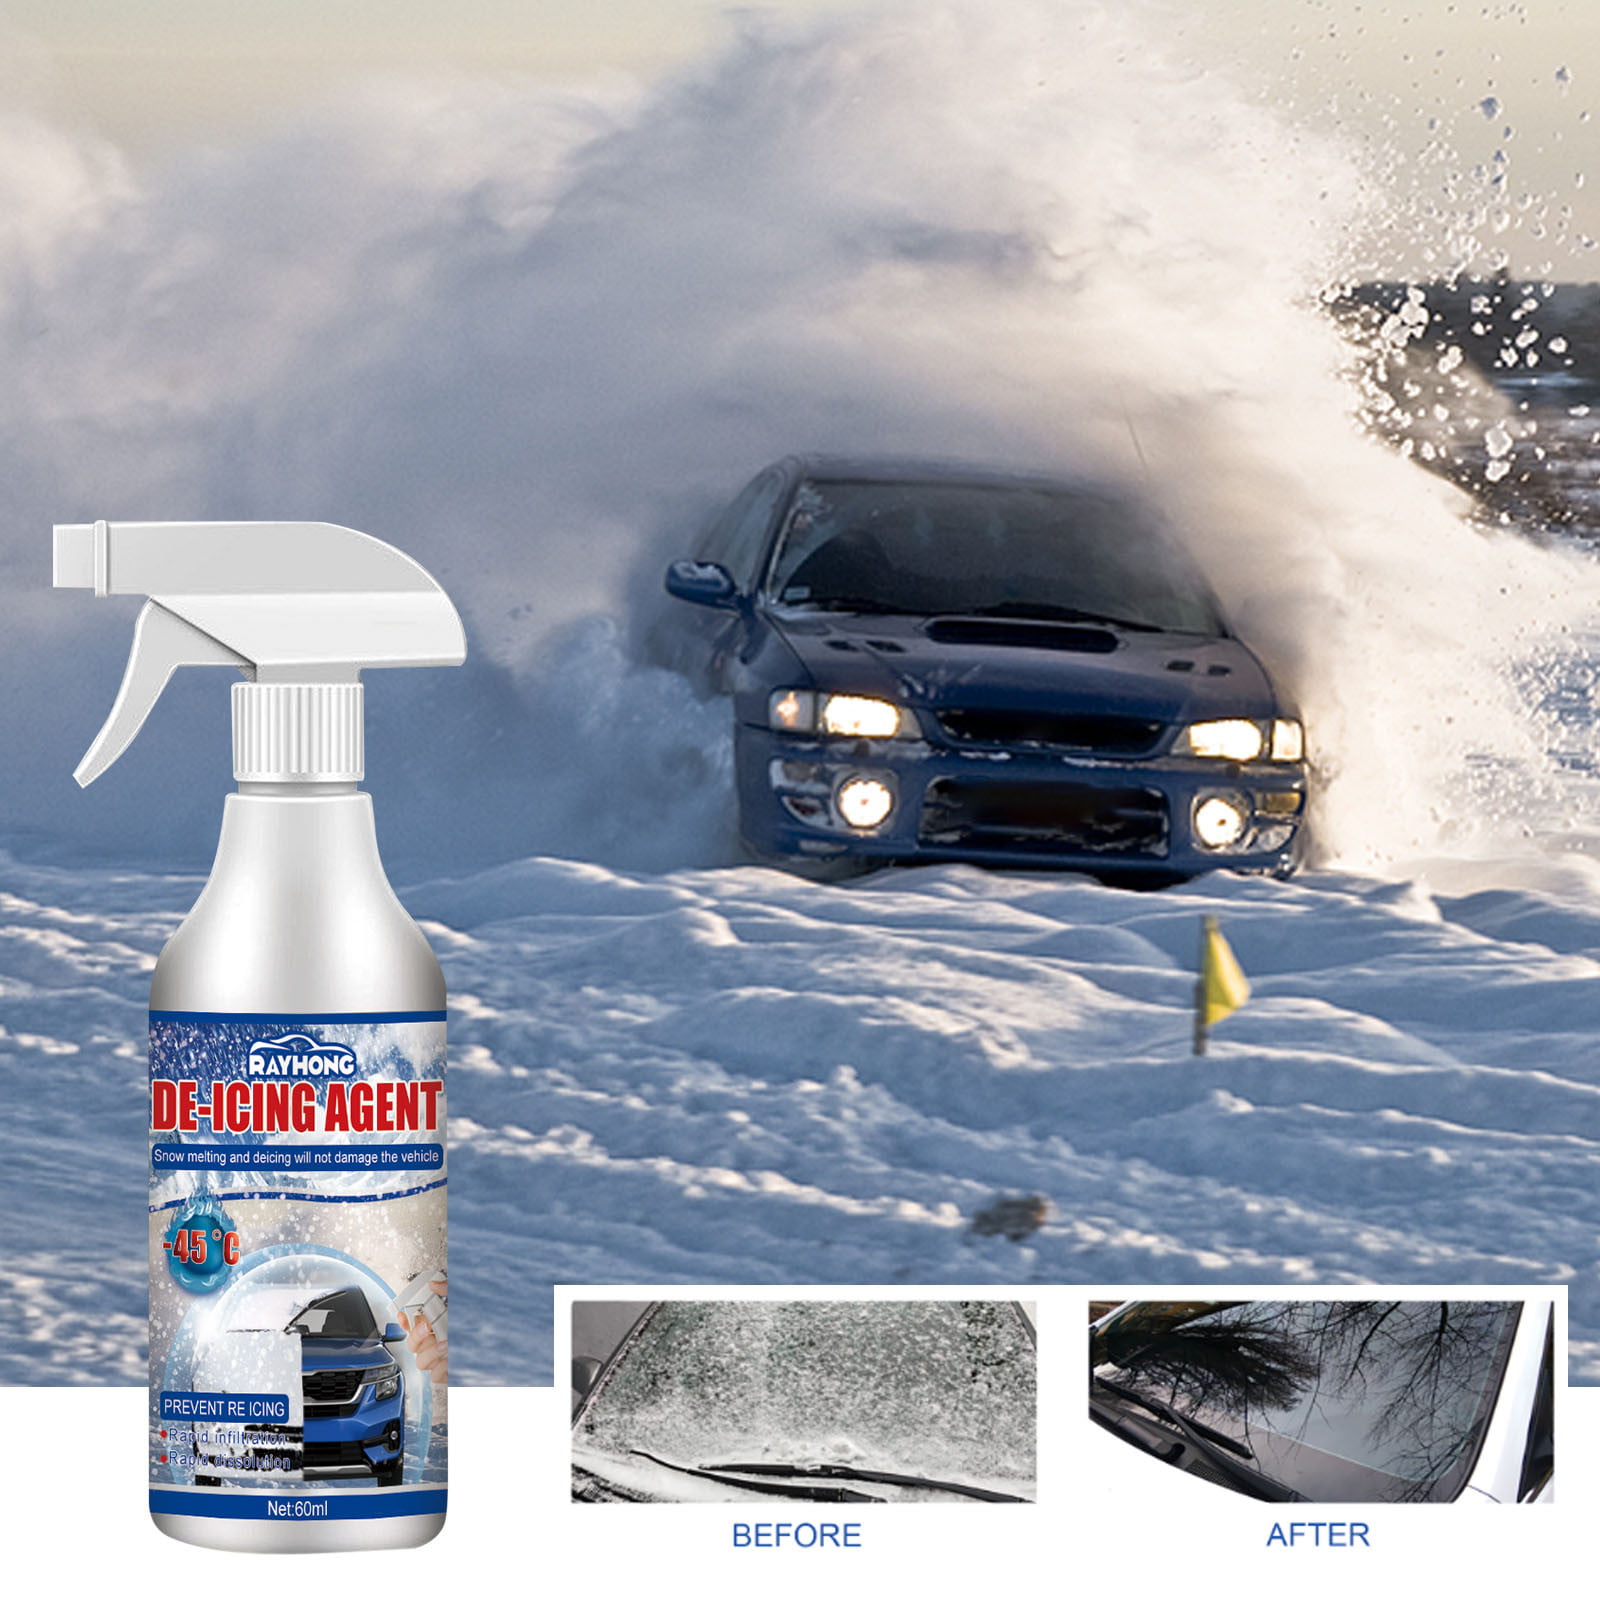 60ml Windshield Defrosting De-icer Spray Freezer Frost Remover Instantly  Snow Frost Melting for Windows Mirrors Key Locks Latches, Snow Melting  Agent